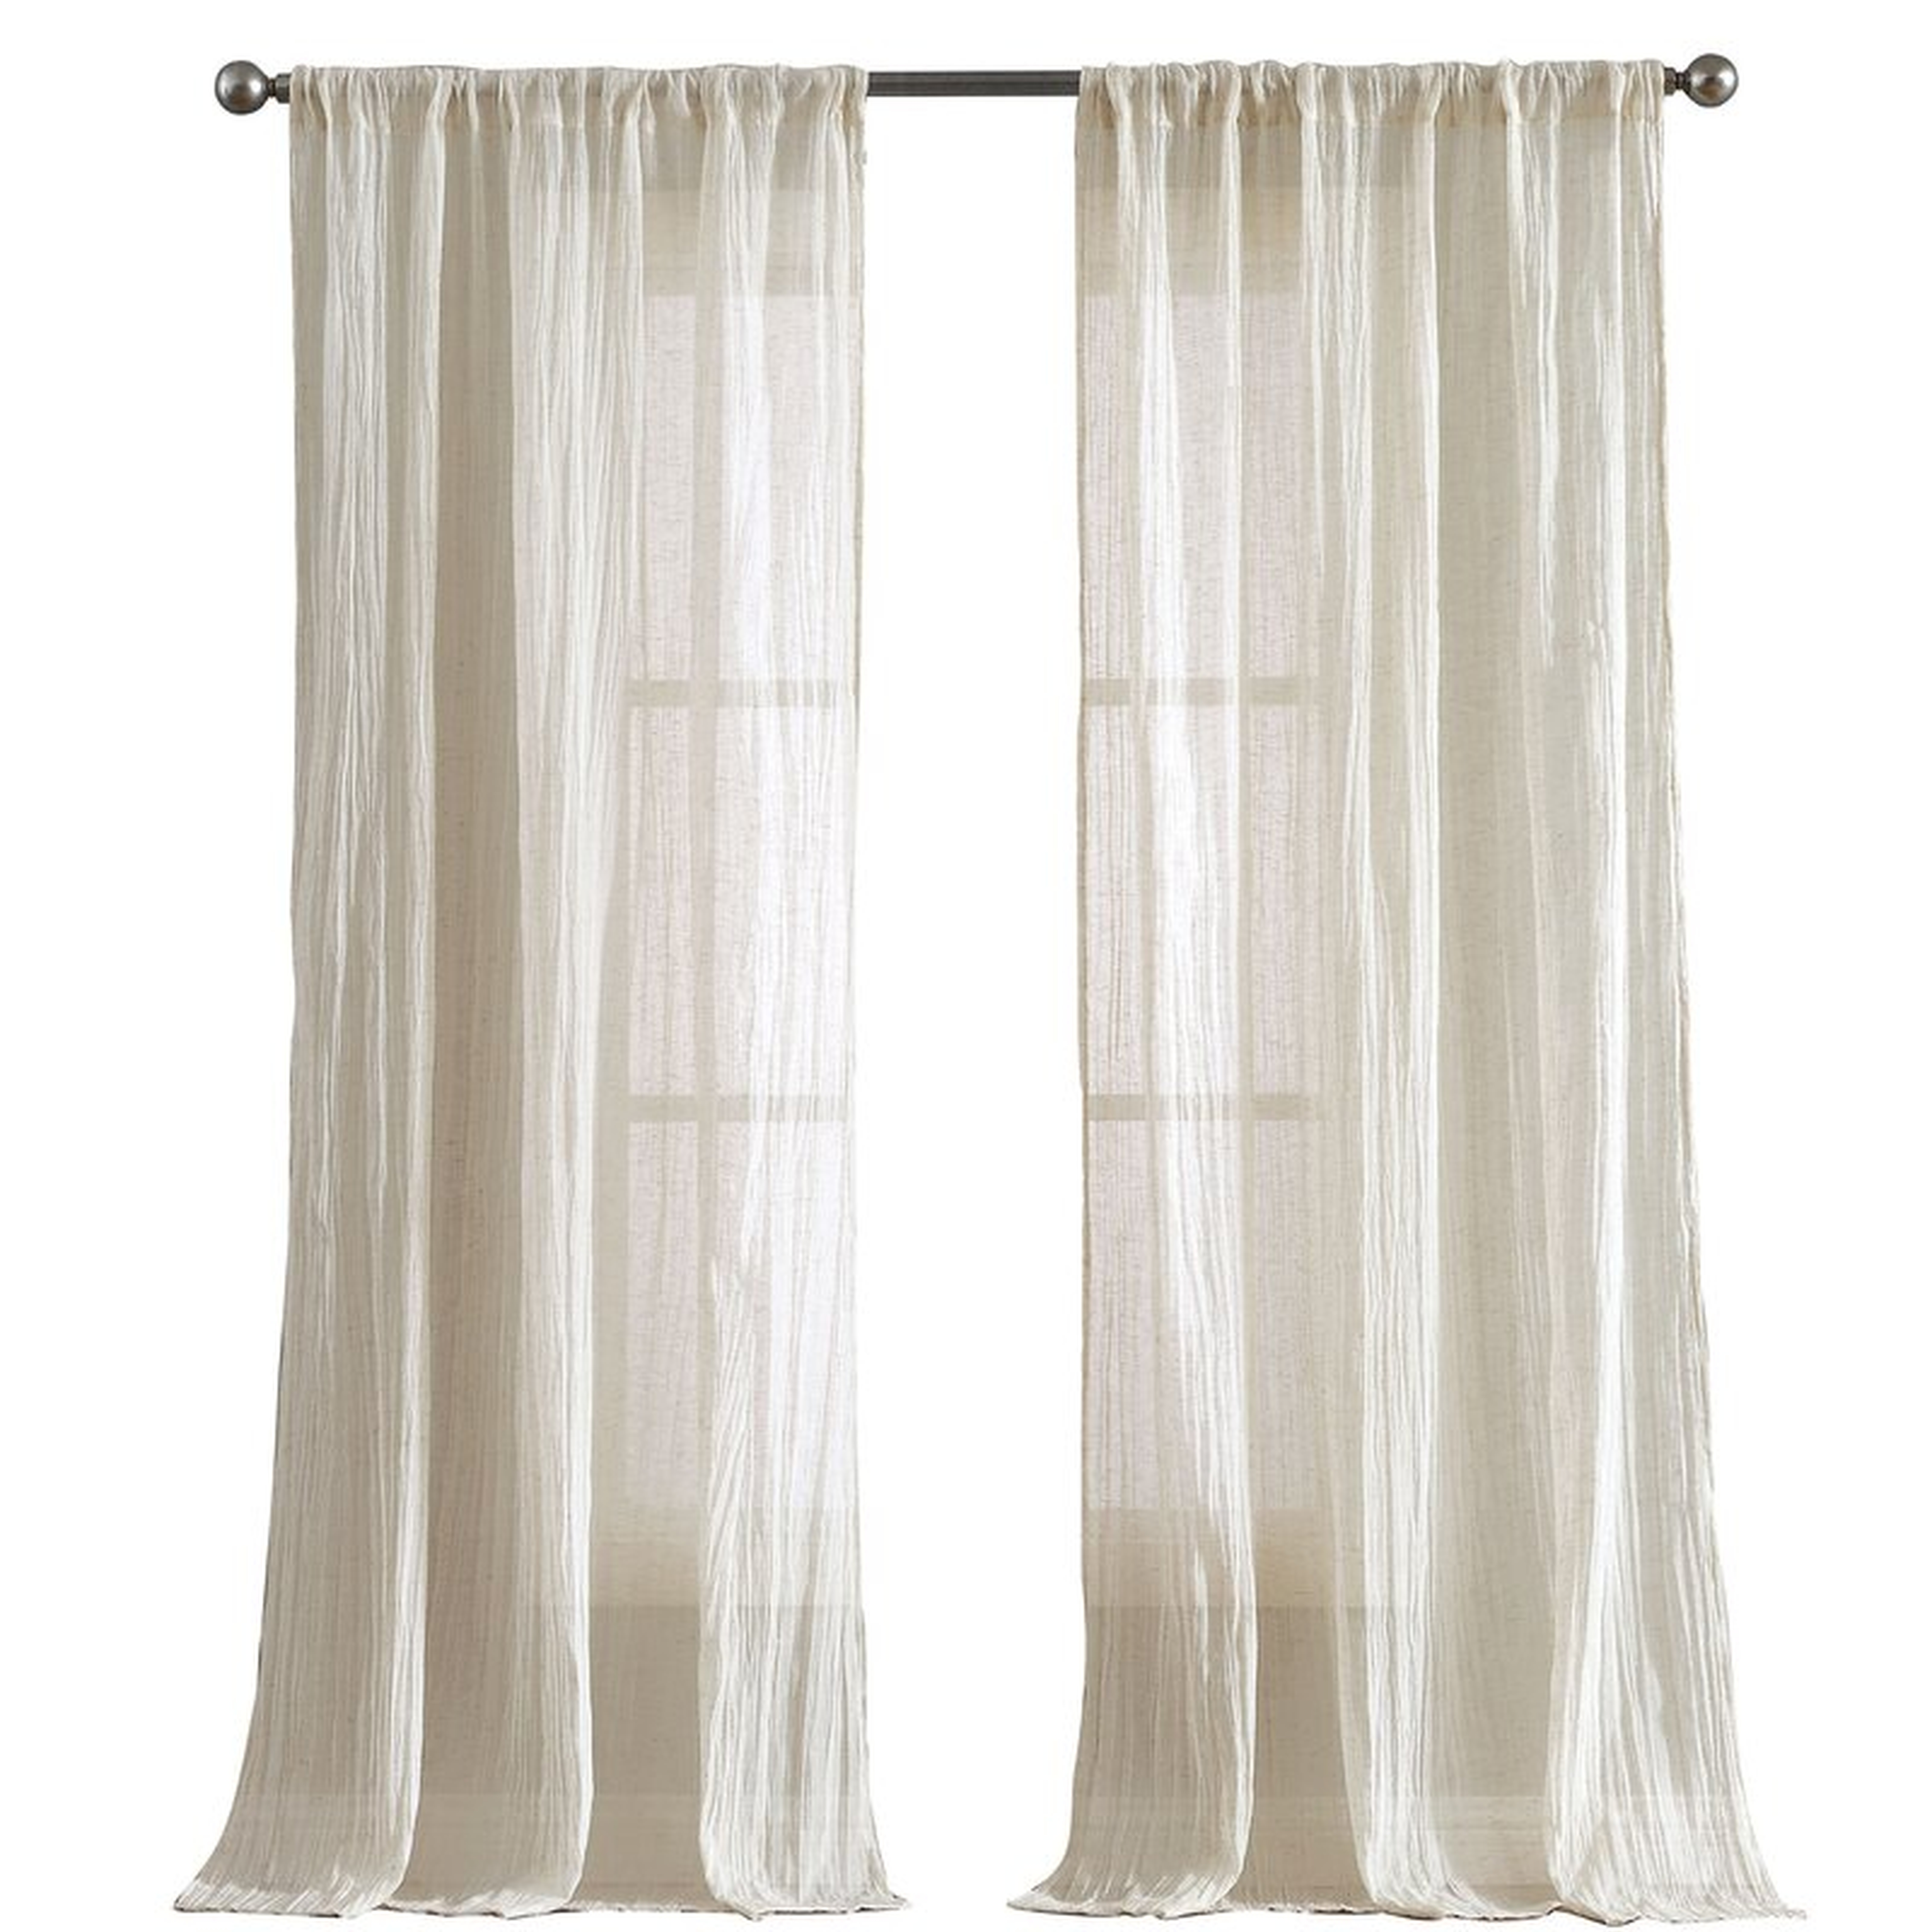 French Connection Charter Crushed Window Solid Semi-Sheer Curtain Panels (Set of 2) - Wayfair